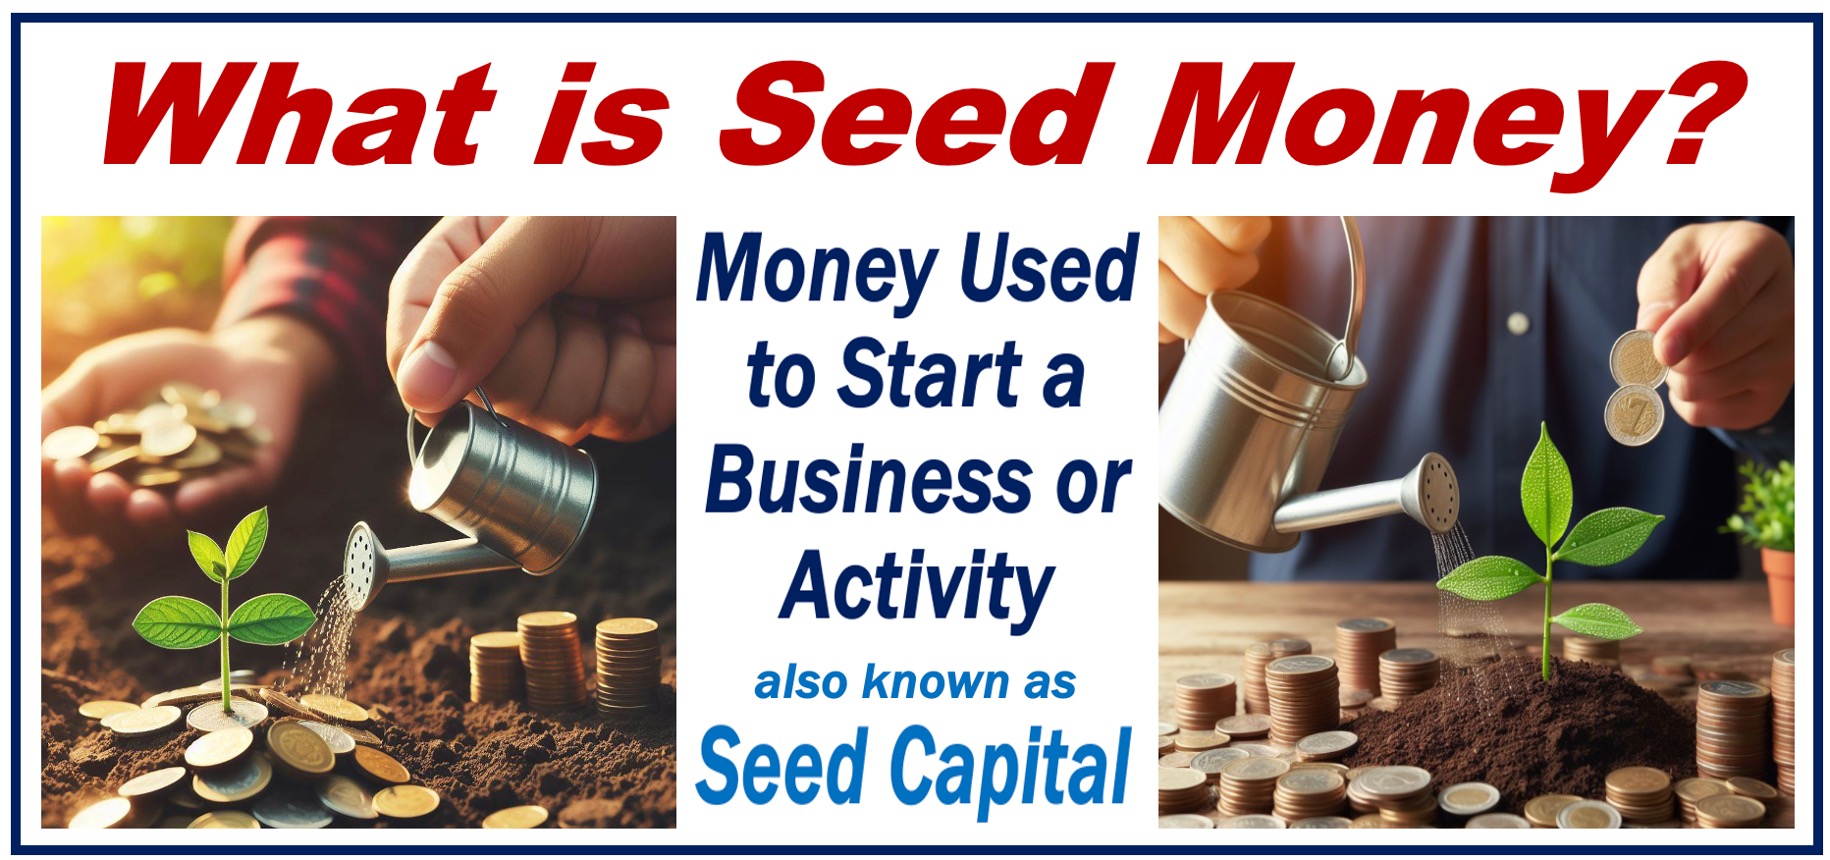 Two images depicting Seed Money - a.k.a. Seed Capital